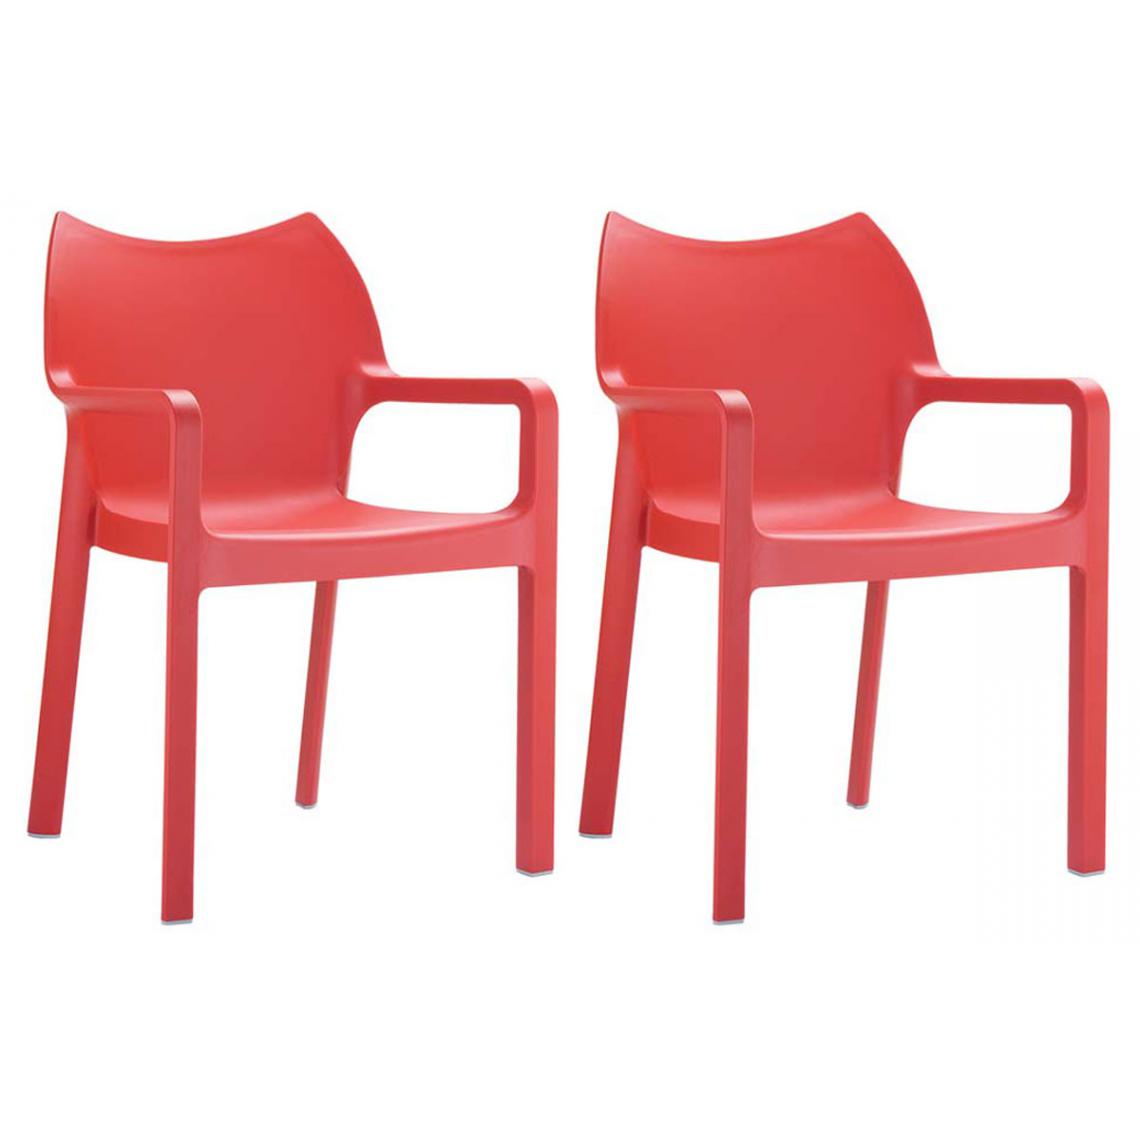 Icaverne - Admirable SET de 2 chaises empilables gamme Naypyidaw couleur rouge - Tabourets